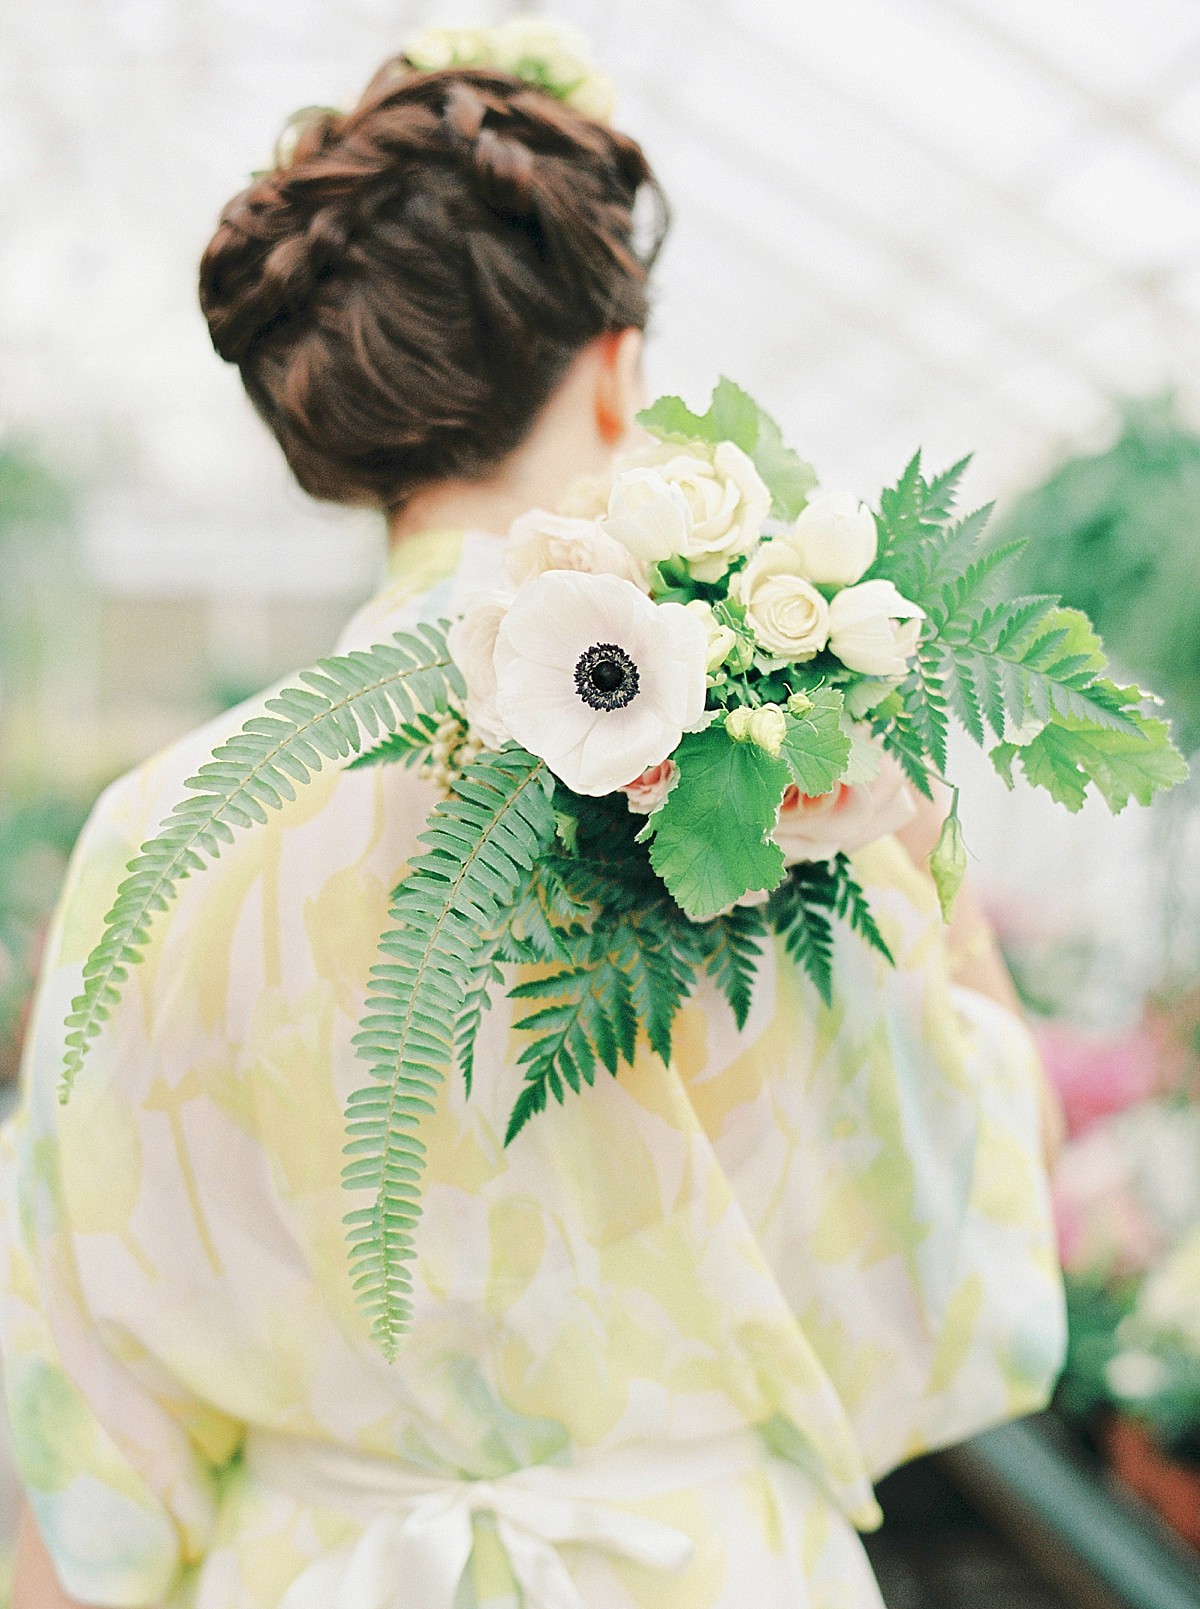 Leafy green, gold and ‘elegant luxe’ inspiration for brides. Shoot styling + concept by The Wedding Bazaar, film photography by Georgina Harrison.